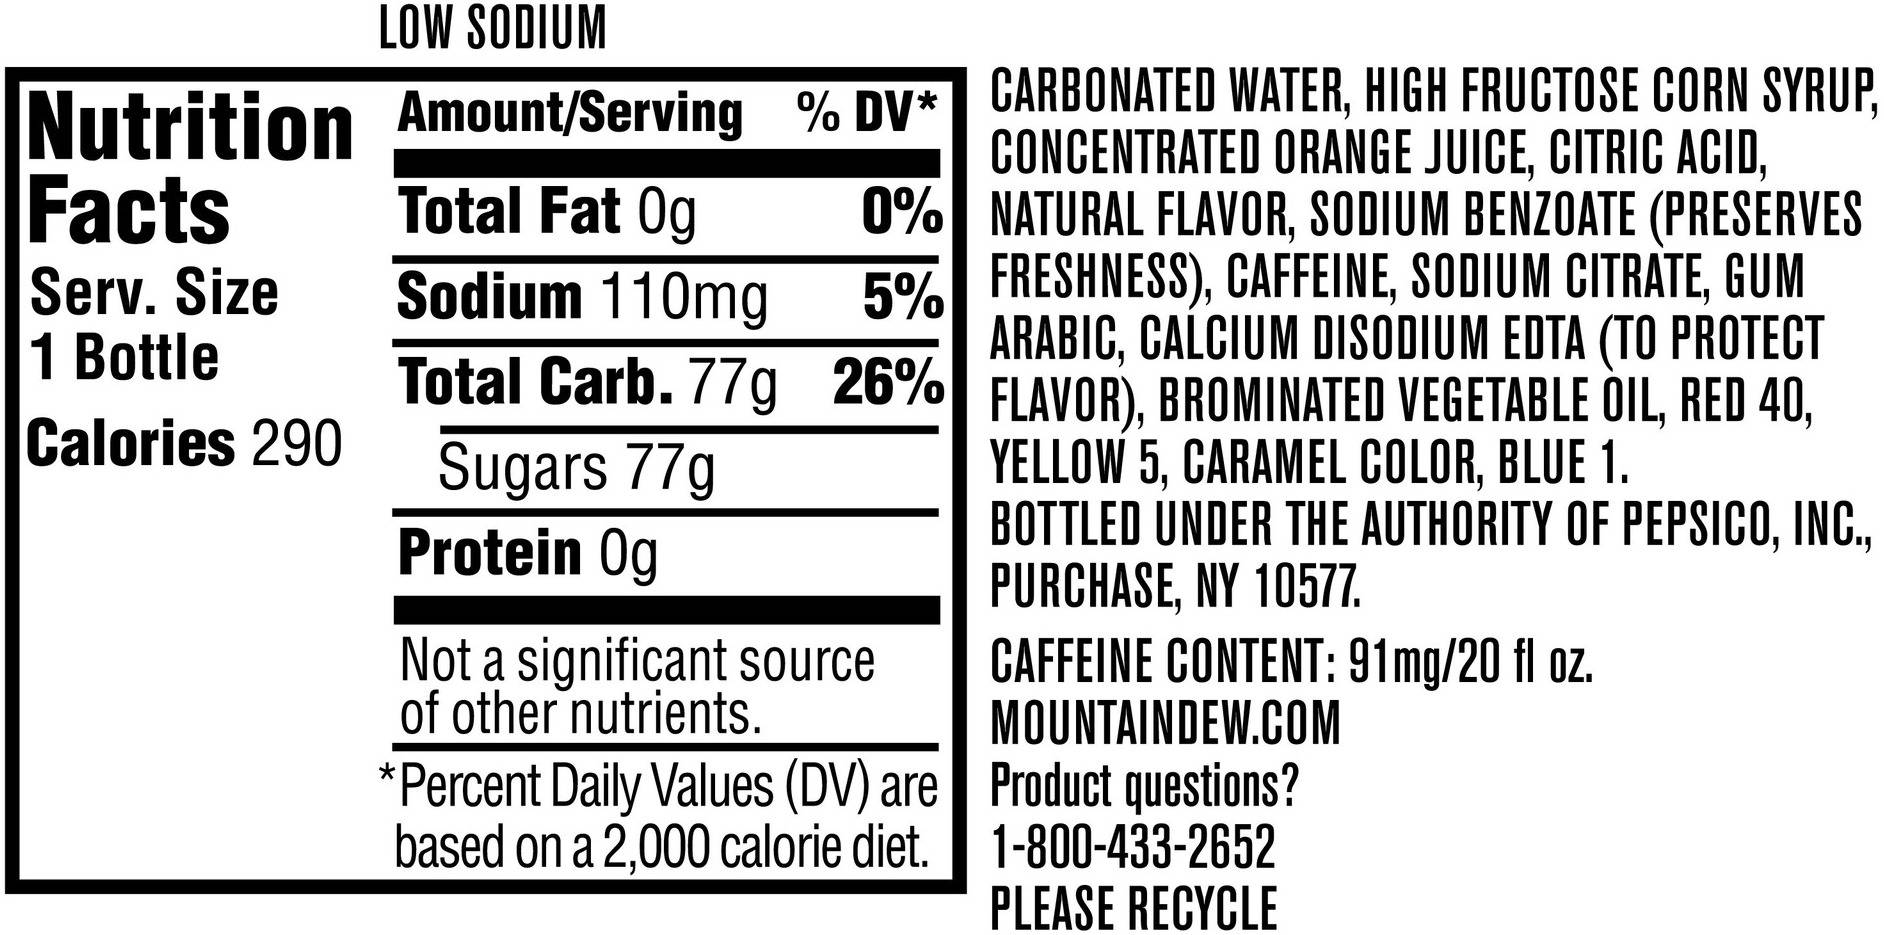 Image describing nutrition information for product Mtn Dew Holiday Brew LTO